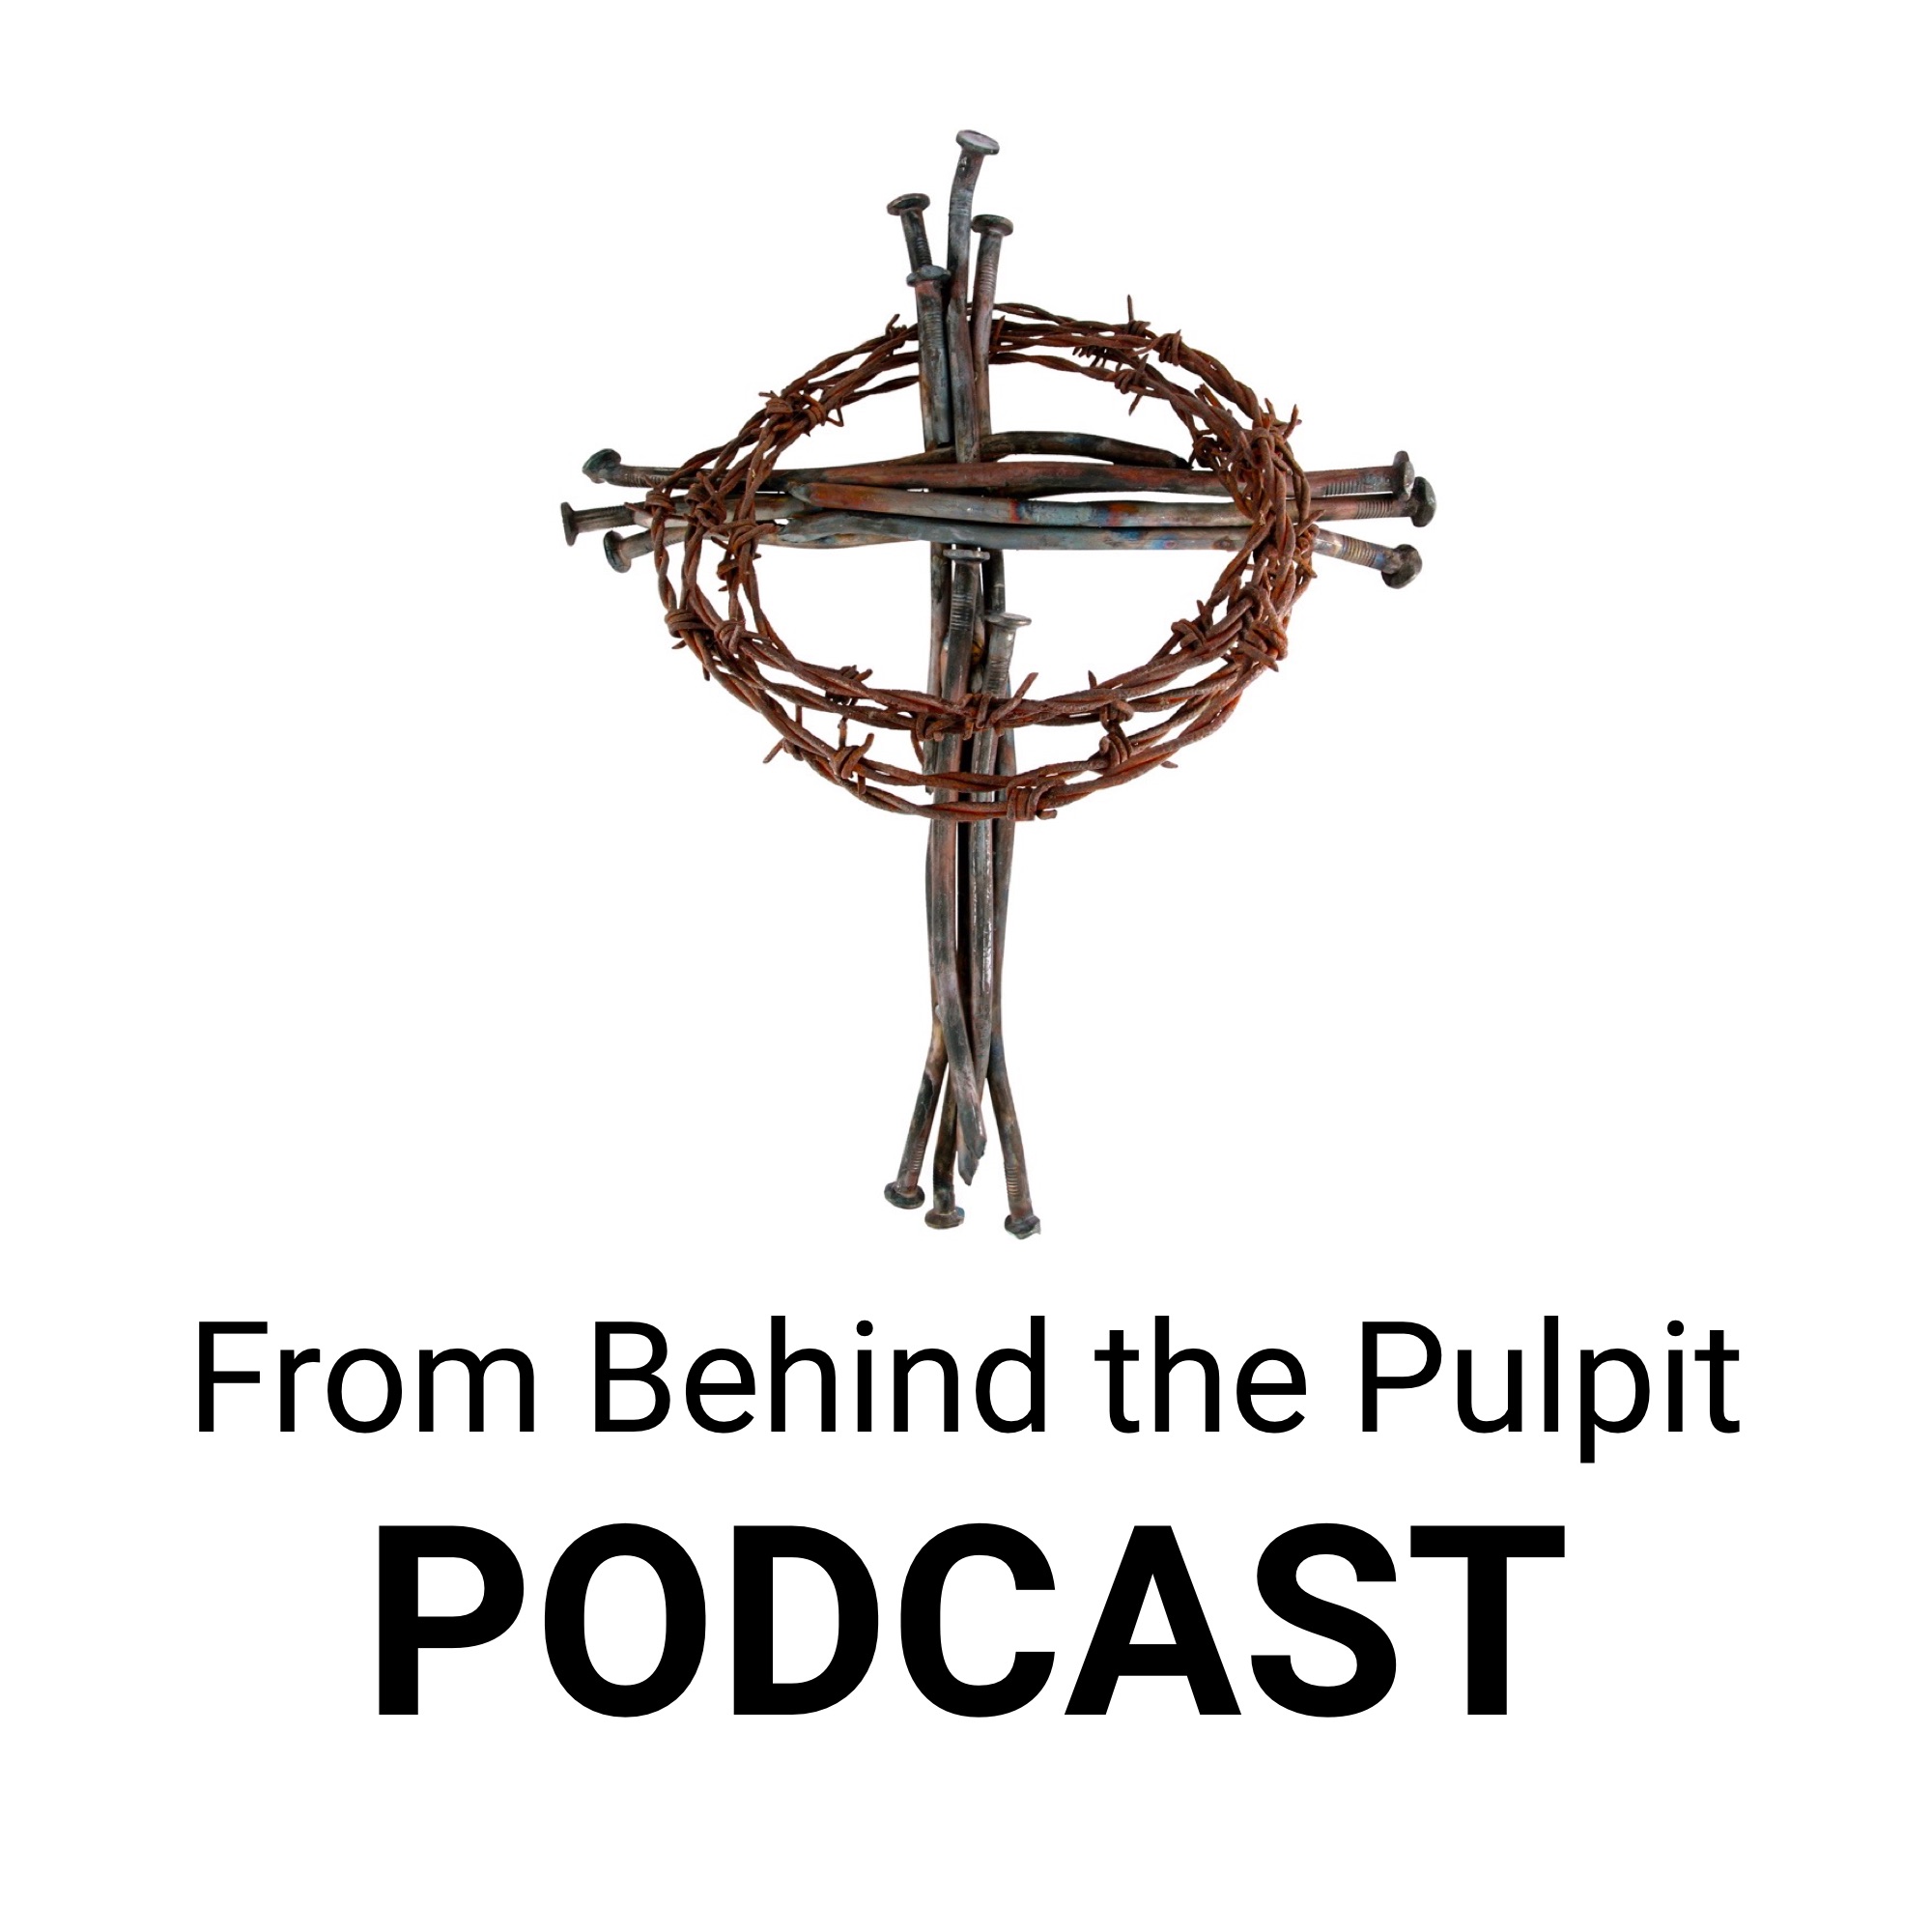 From Behind the Pulpit Podcast